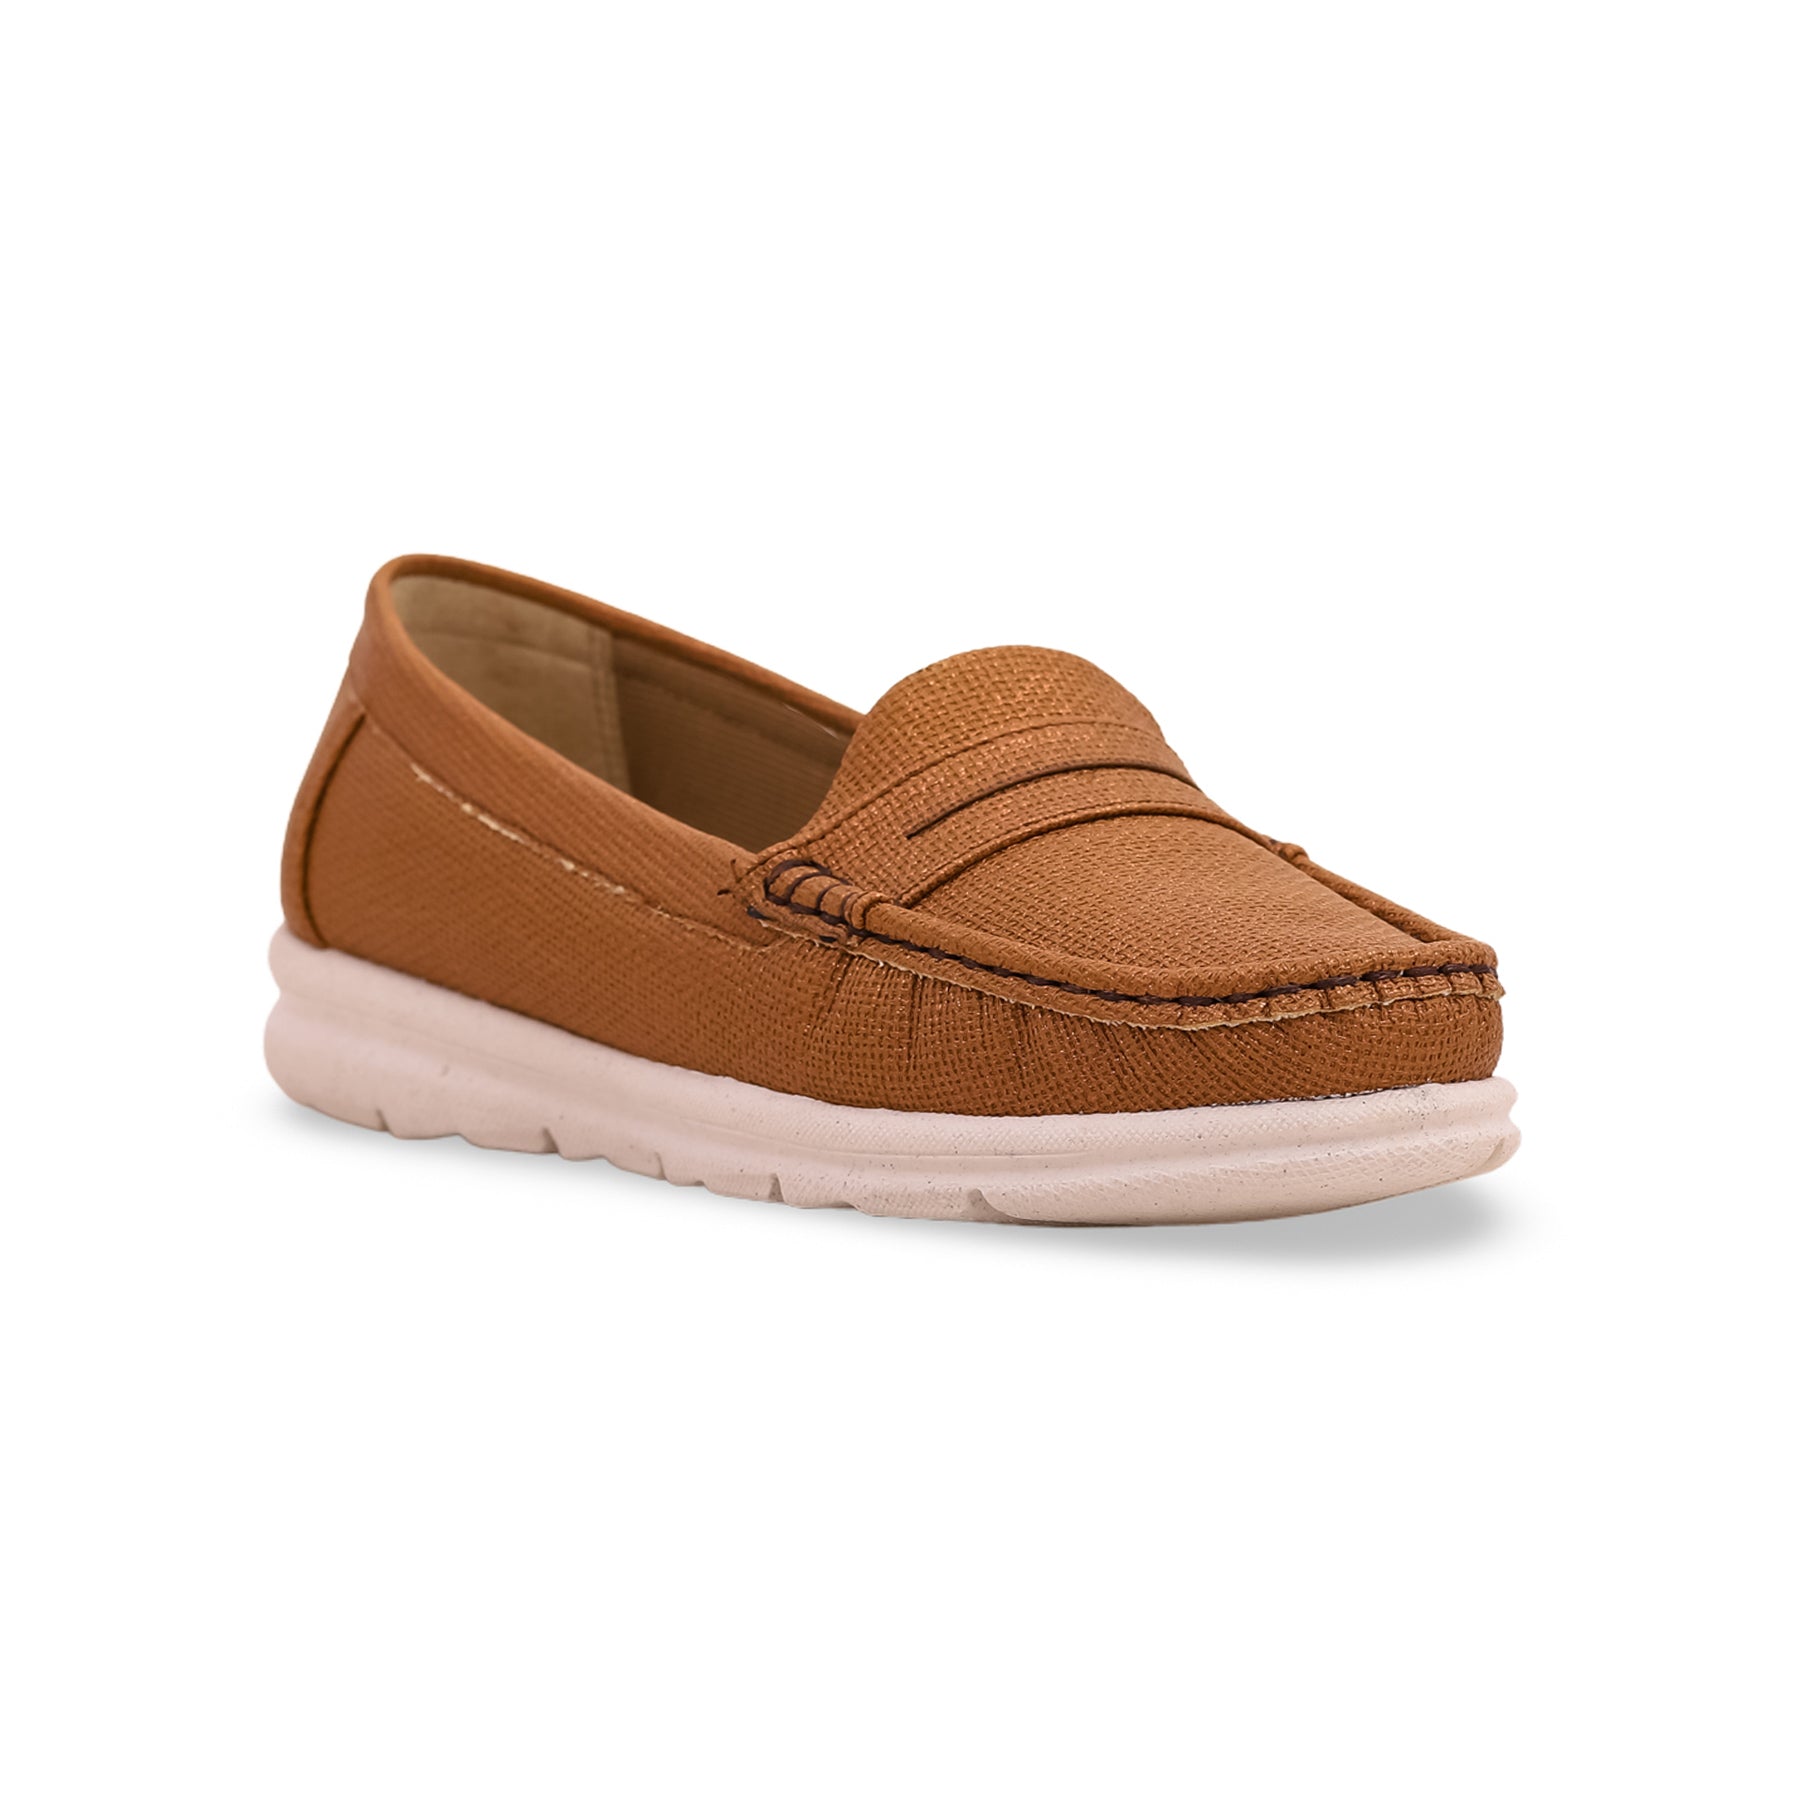 Brown Moccasin WN4299